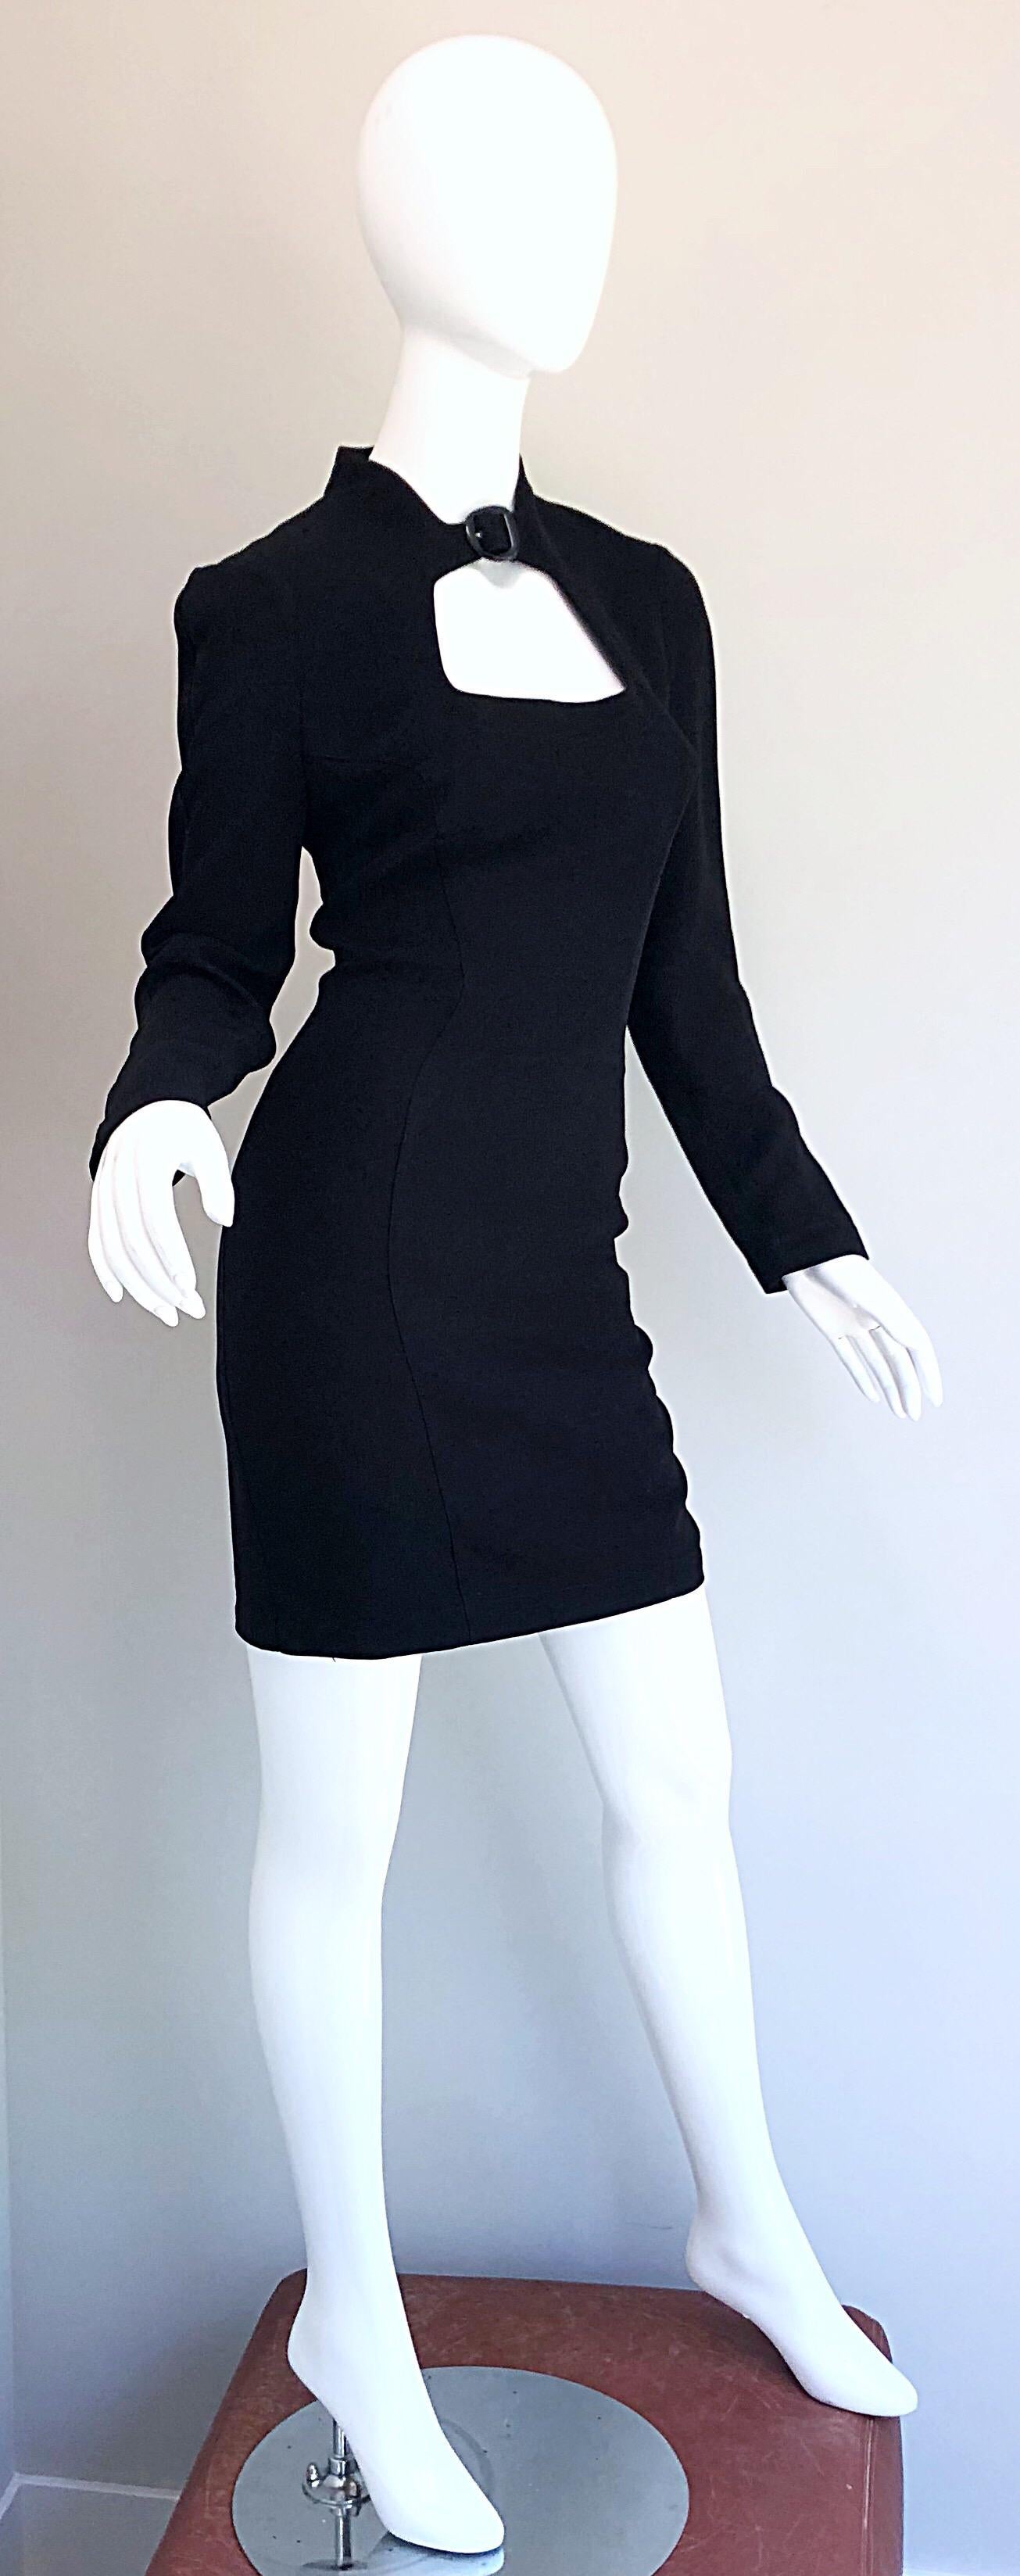 Iconic Vintage Thierry Mugler 80s Bondage Inspired Cut - Out Black 1980s Dress In Excellent Condition For Sale In San Diego, CA